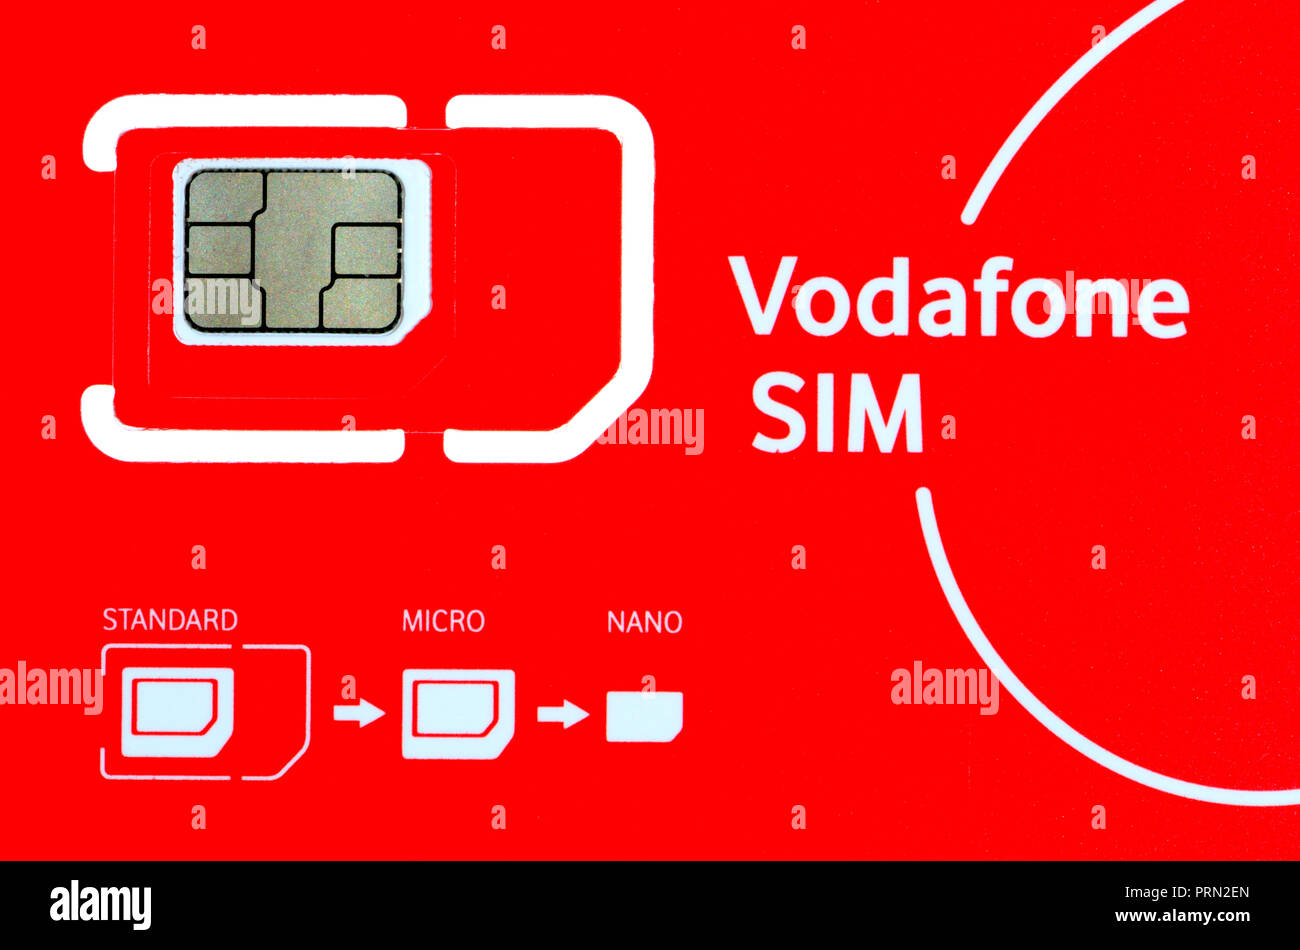 Vodafone Telephone Sim card showing different sizes - standard, micro and nano Stock Photo